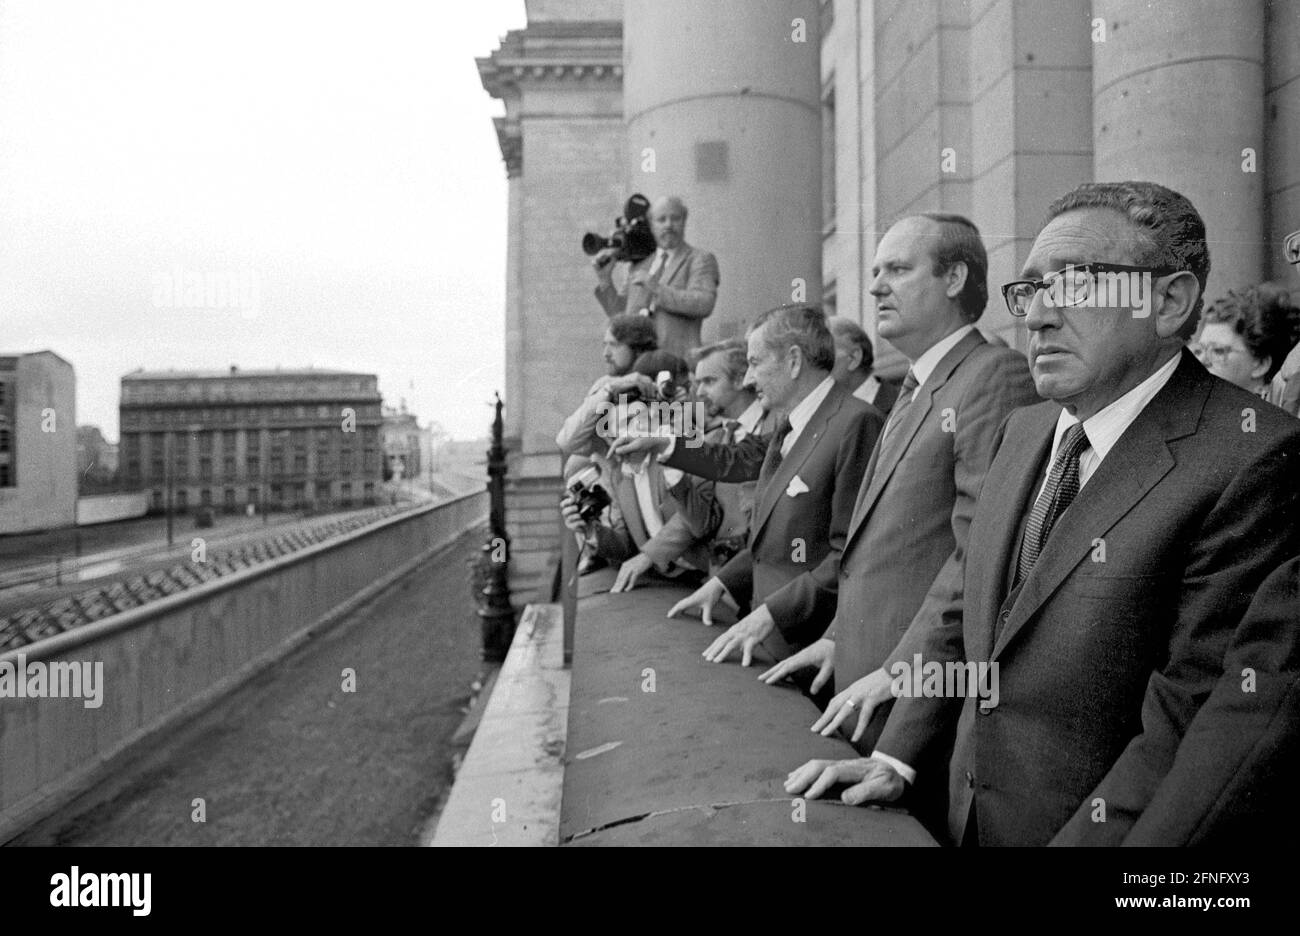 Berlin Wall / GDR border /15.6.1980 A delegation from Chase Manhattan Bank visits the Reichstag. Henry Kissinger, Dietrich Stobbe, Governing Mayor, and Rockefeller look at the Wall behind the Reichstag. The building on the left behind the Wall is the Chamber of Technology of the GDR, today Jakob-Kaiser-Haus of the Bundestag. The Wall area on the left is today the forecourt for the Bundestag. // Allied / SPD / Local Politics / GDR Wall / [automated translation] Stock Photo